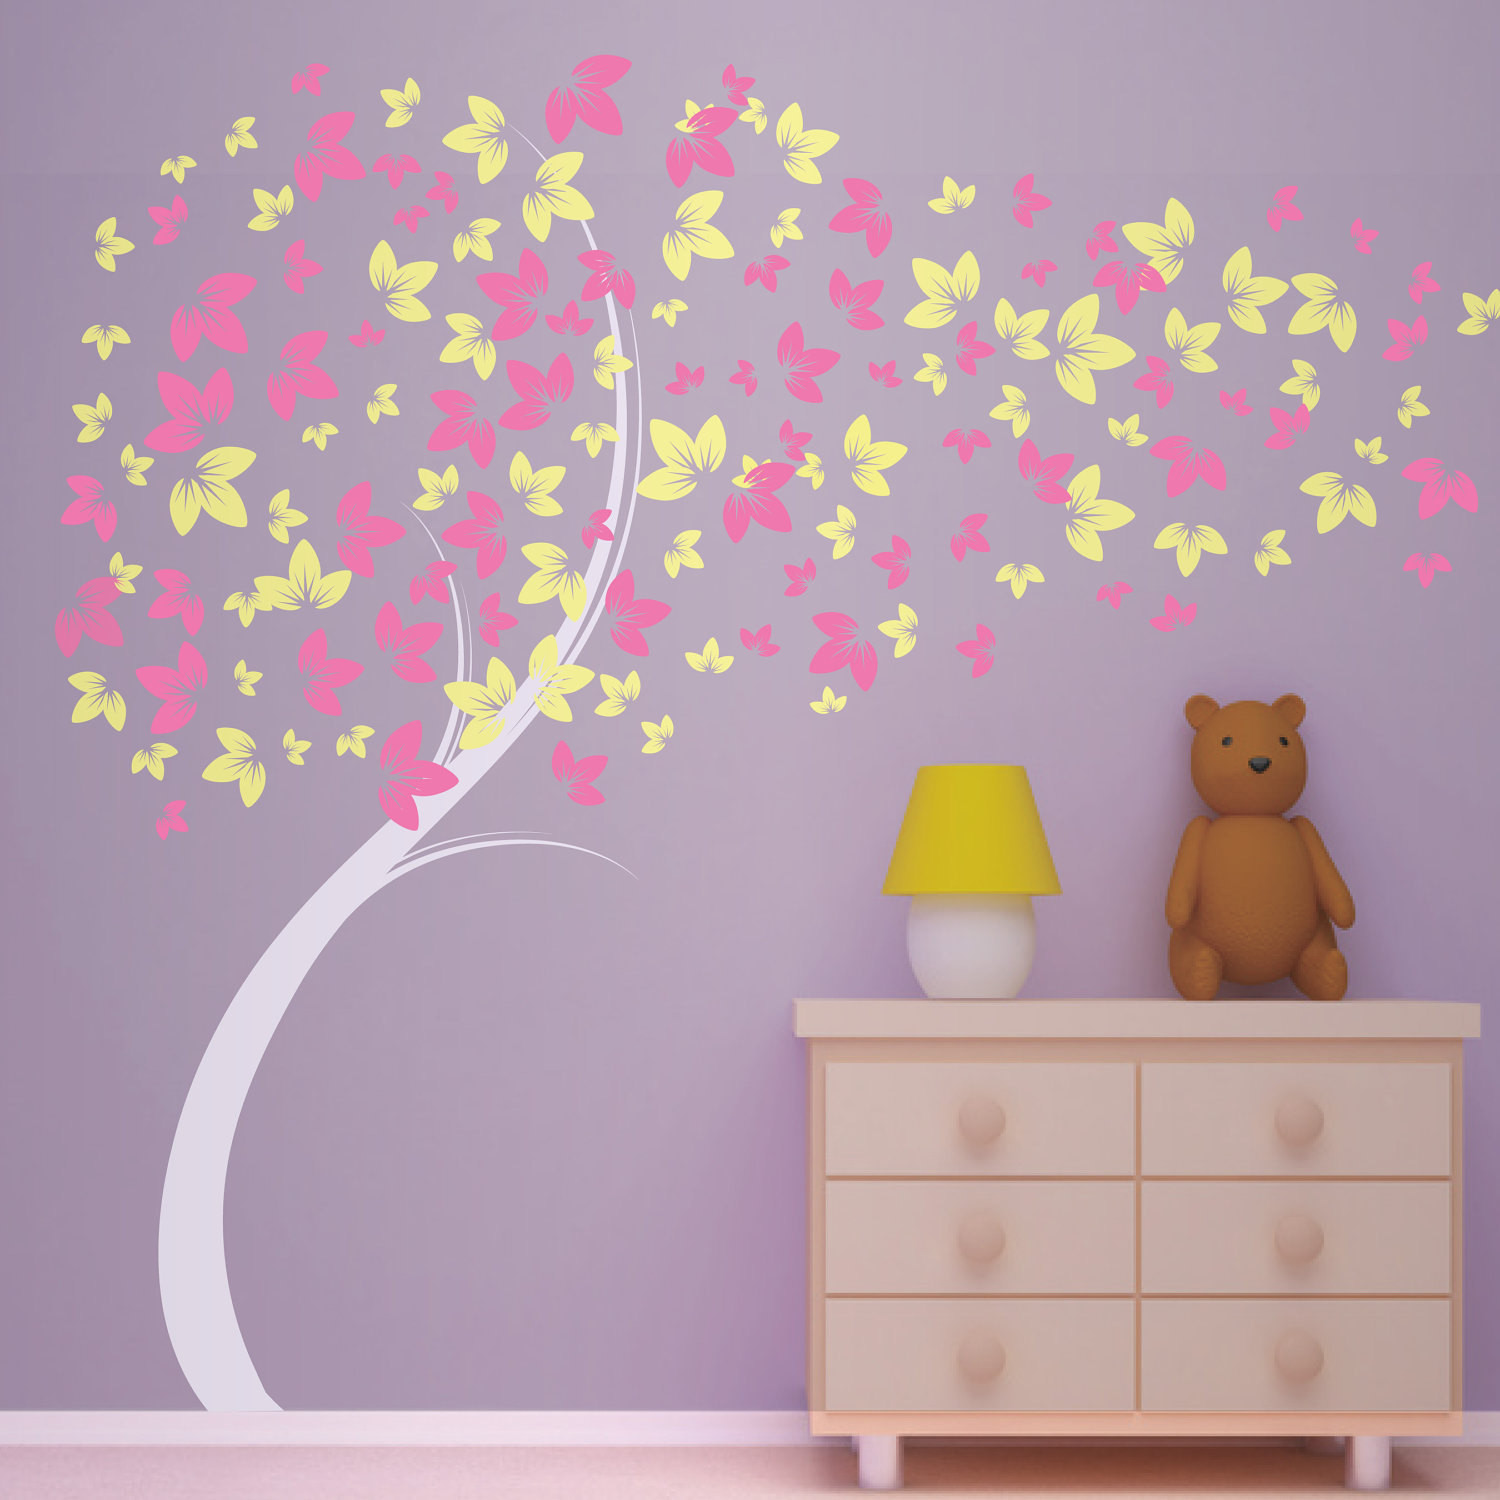 Girls Bedroom Decals
 Curvy Blowing Tree Vinyl Wall Decal Great for little